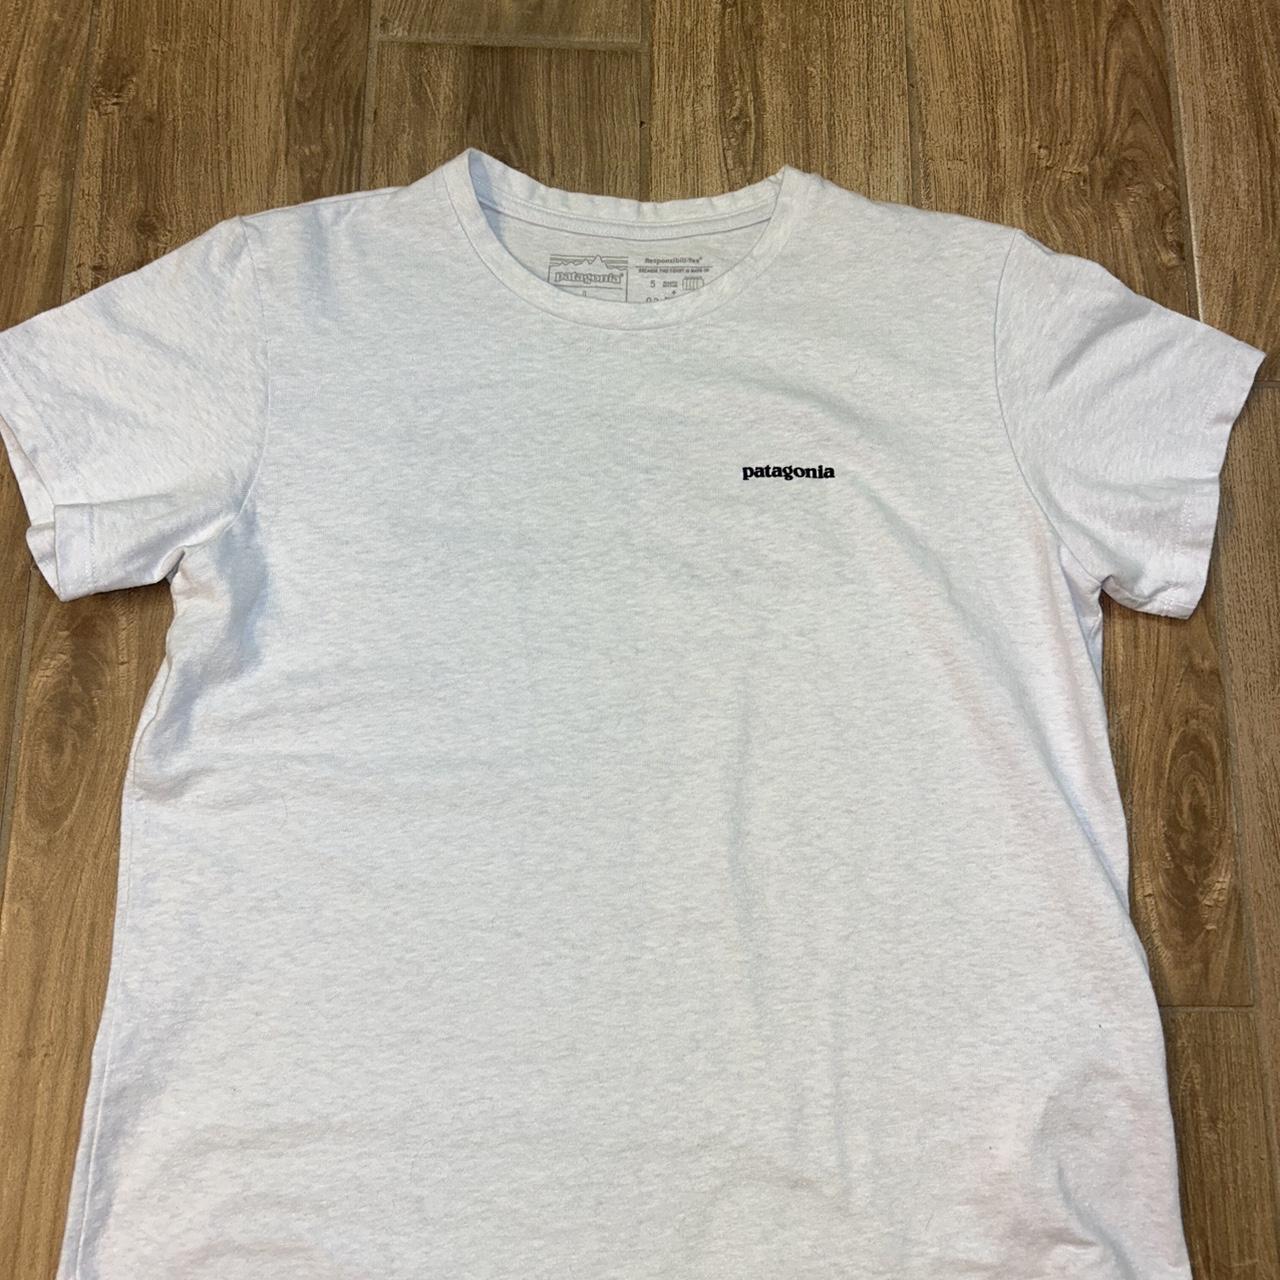 Patagonia responsibill-tee, Message for any questions